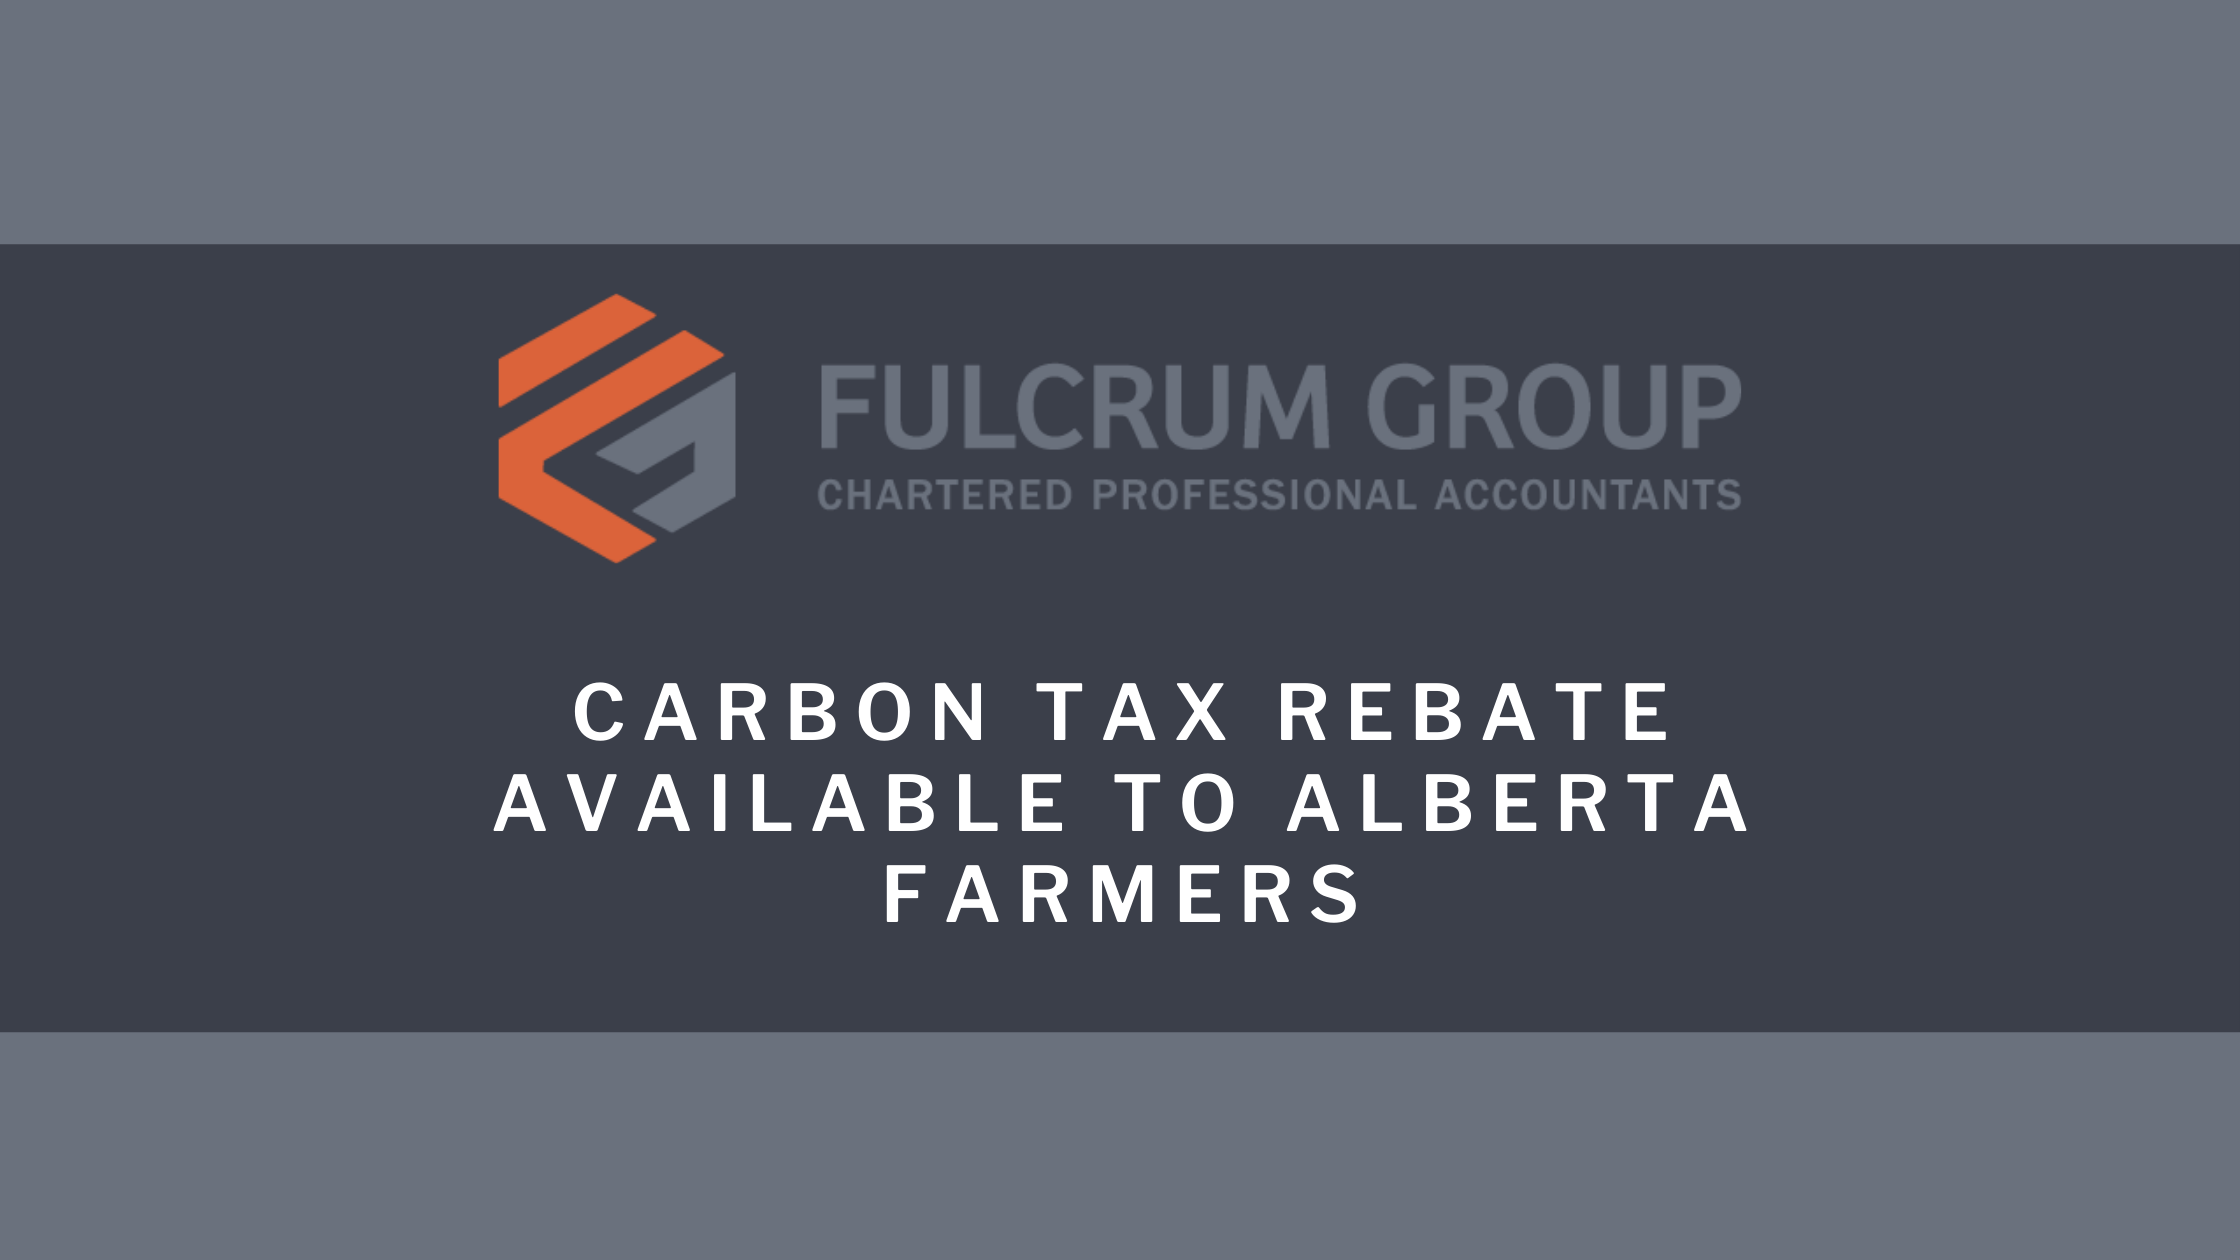 carbon-tax-rebate-available-to-alberta-farmers-fulcrum-group